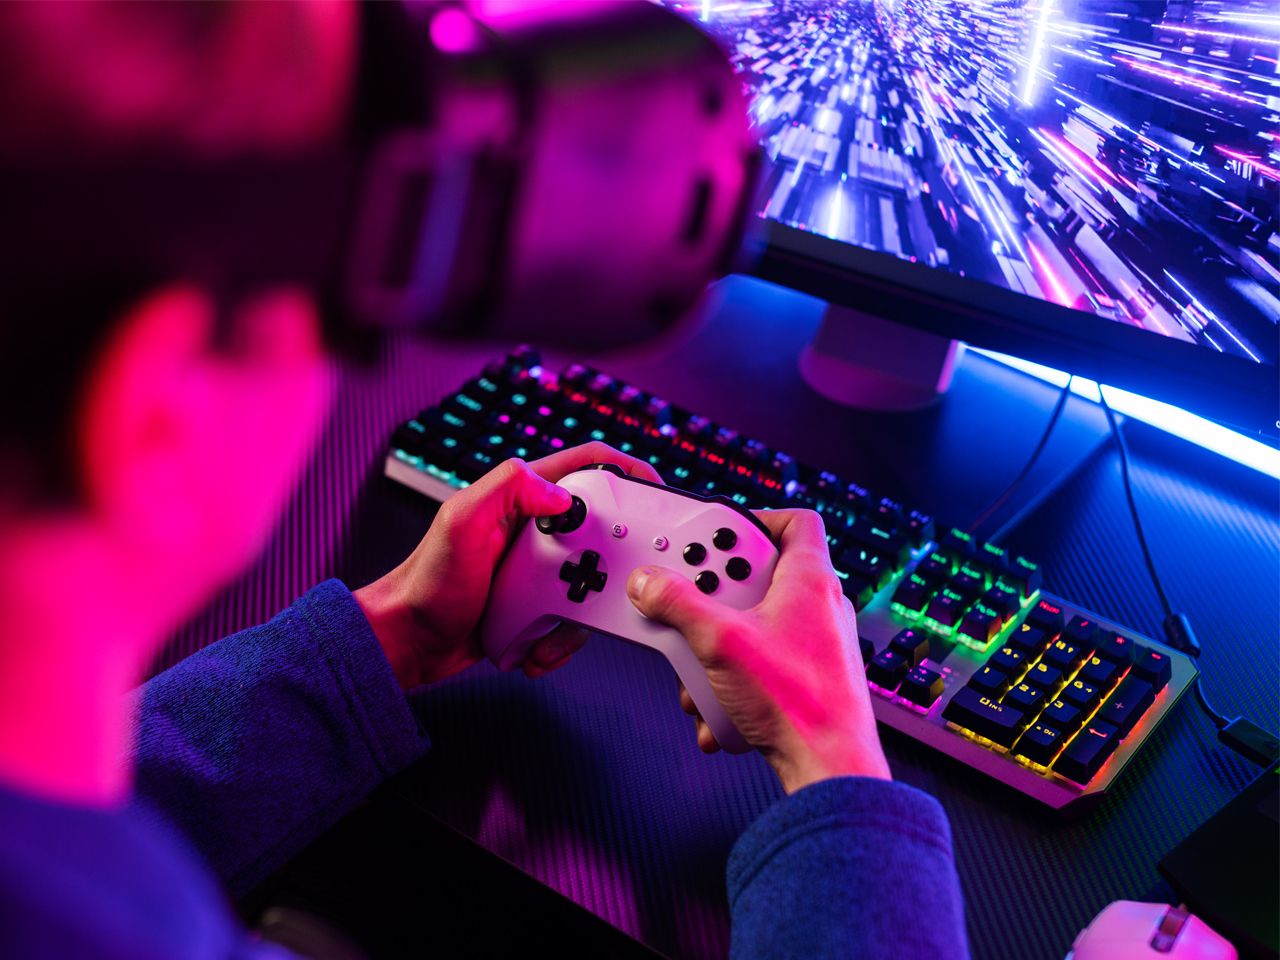 Self-regulation of Online Gaming: Proposed amendments to Intermediary Guidelines